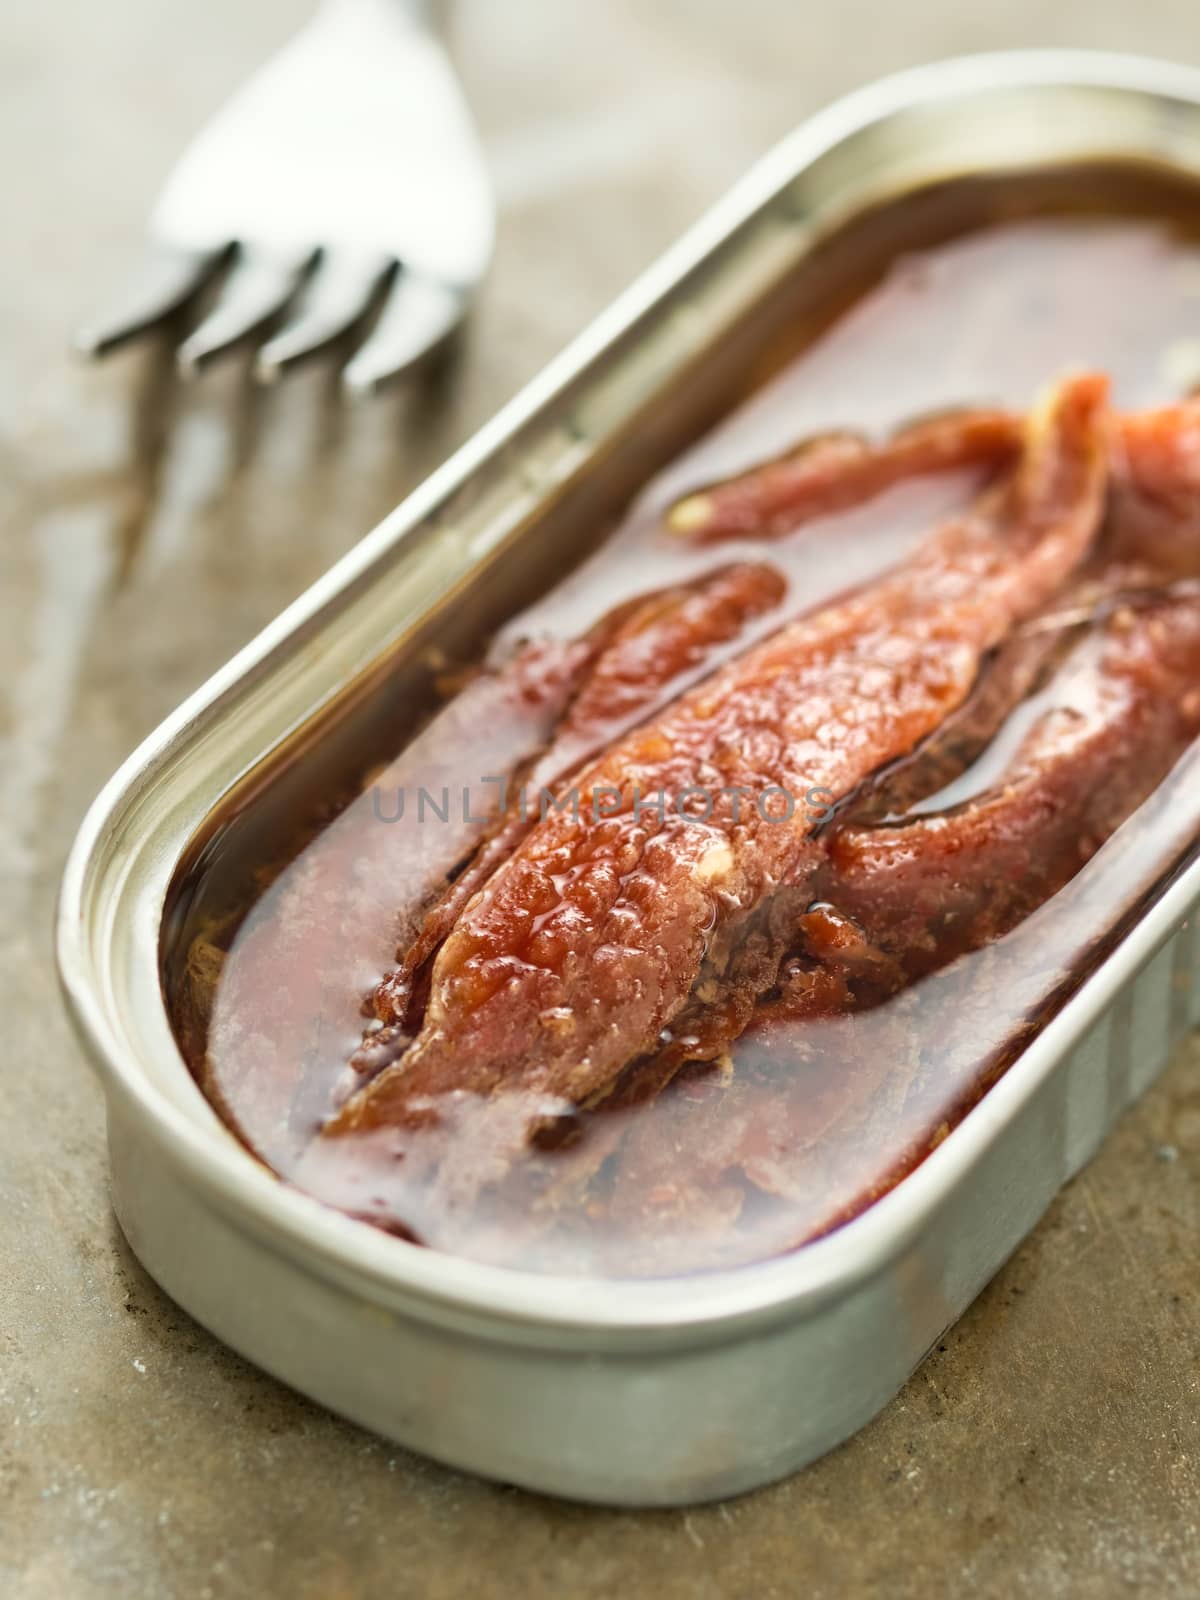 canned salted anchovy fillets in oil by zkruger